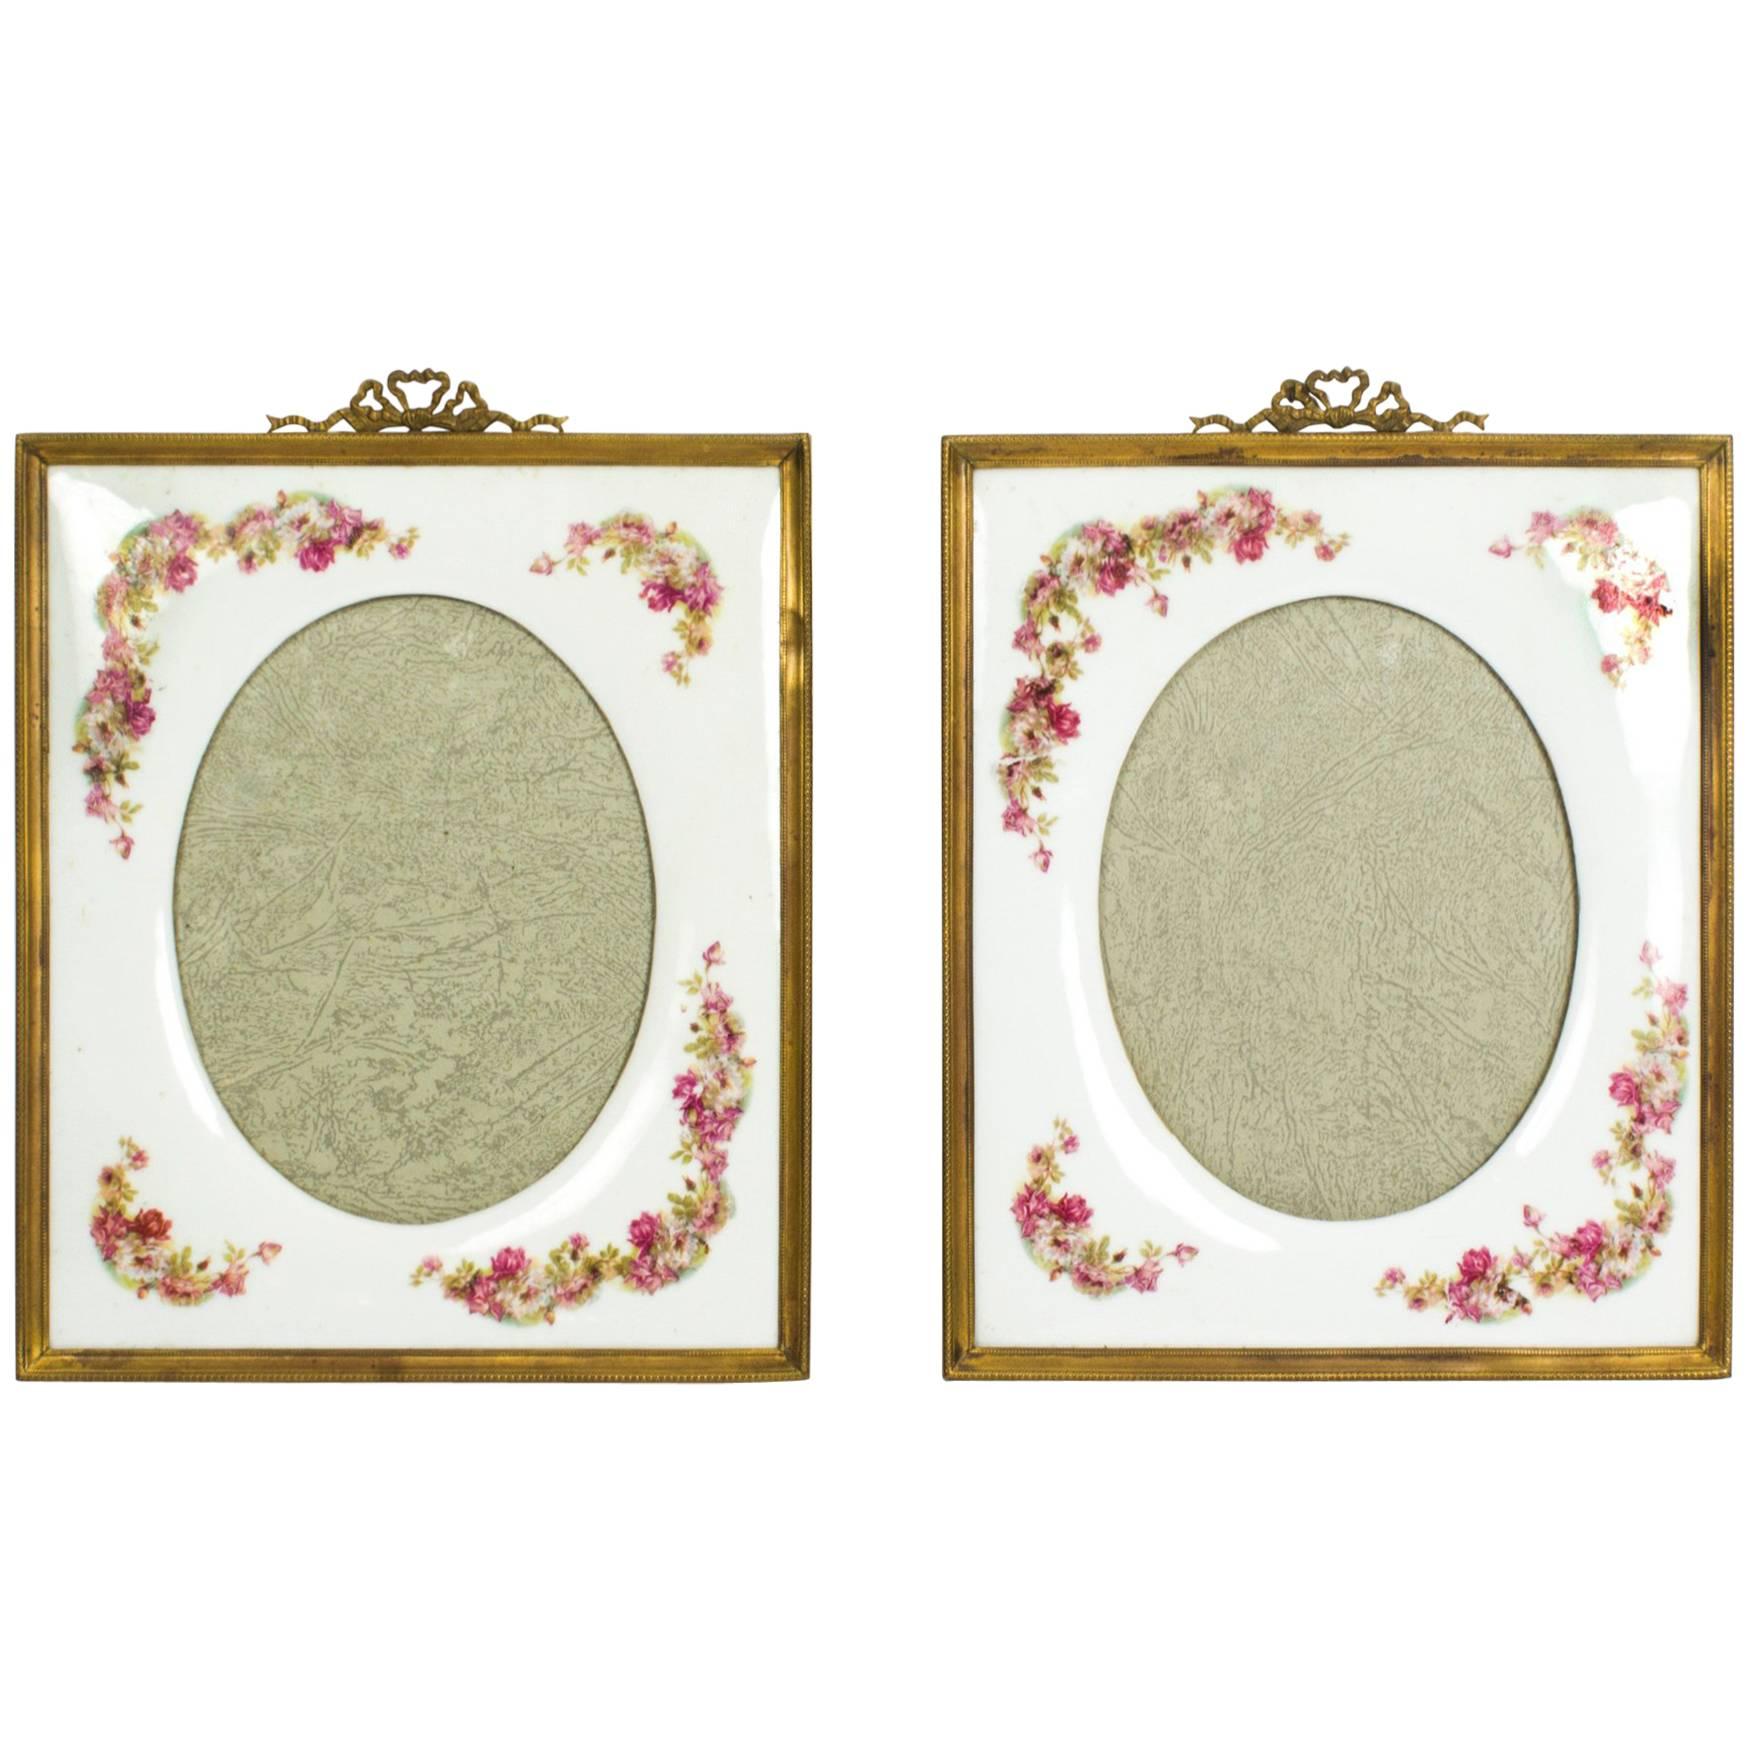 Early 20th Century Pair of Continental Porcelain Photograph Frames